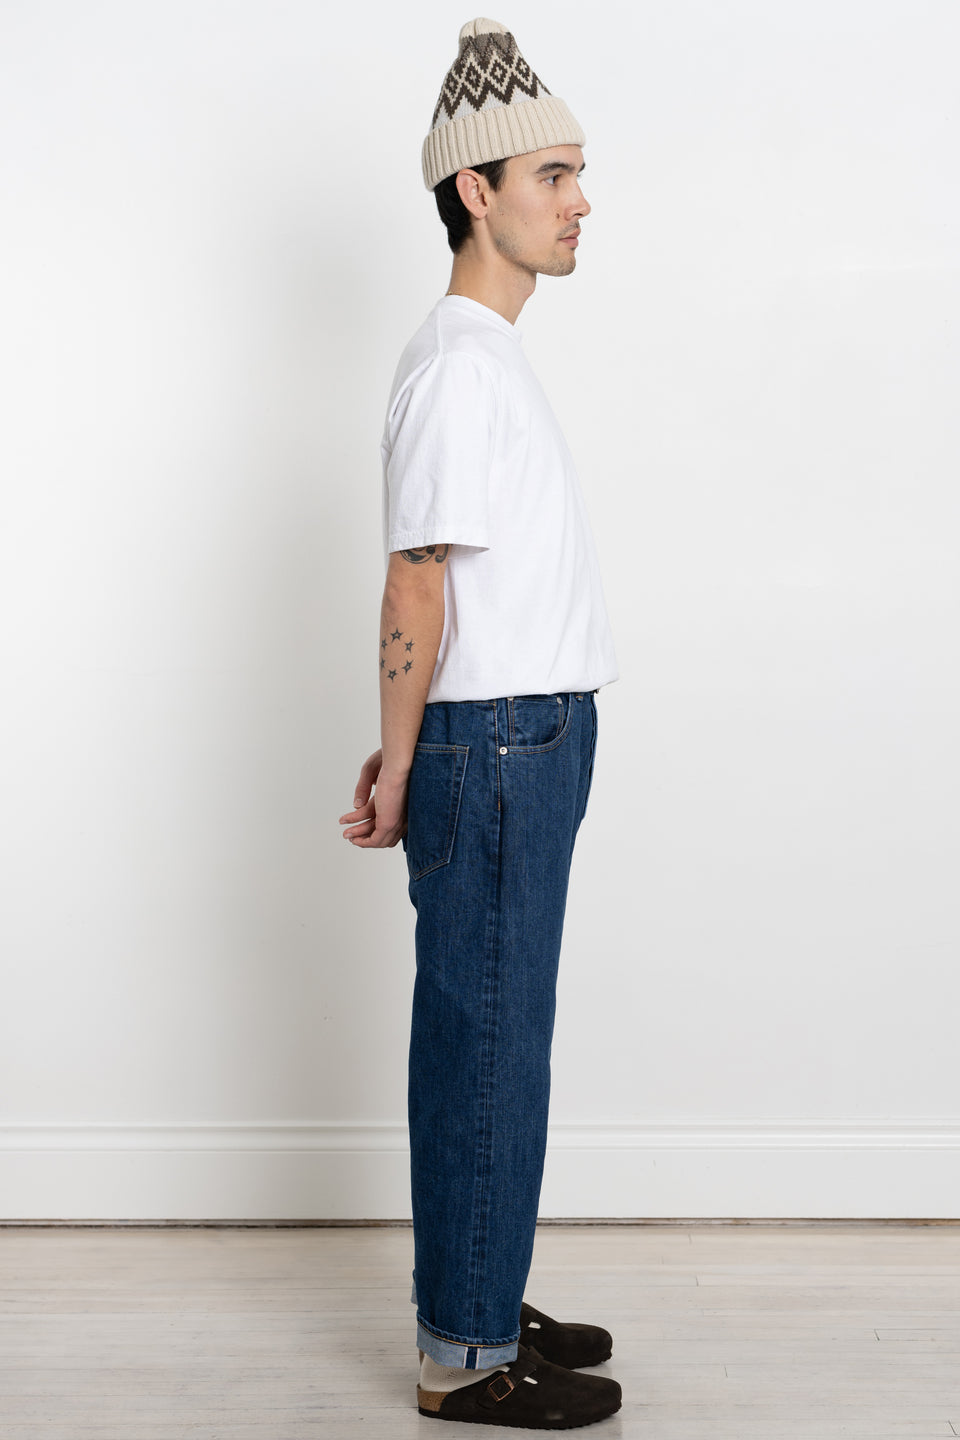 HATSKI Made in Japan Men's Collection FW23 Wide Tapered Selvedge Denim Used Calculus Victoria BC Canada